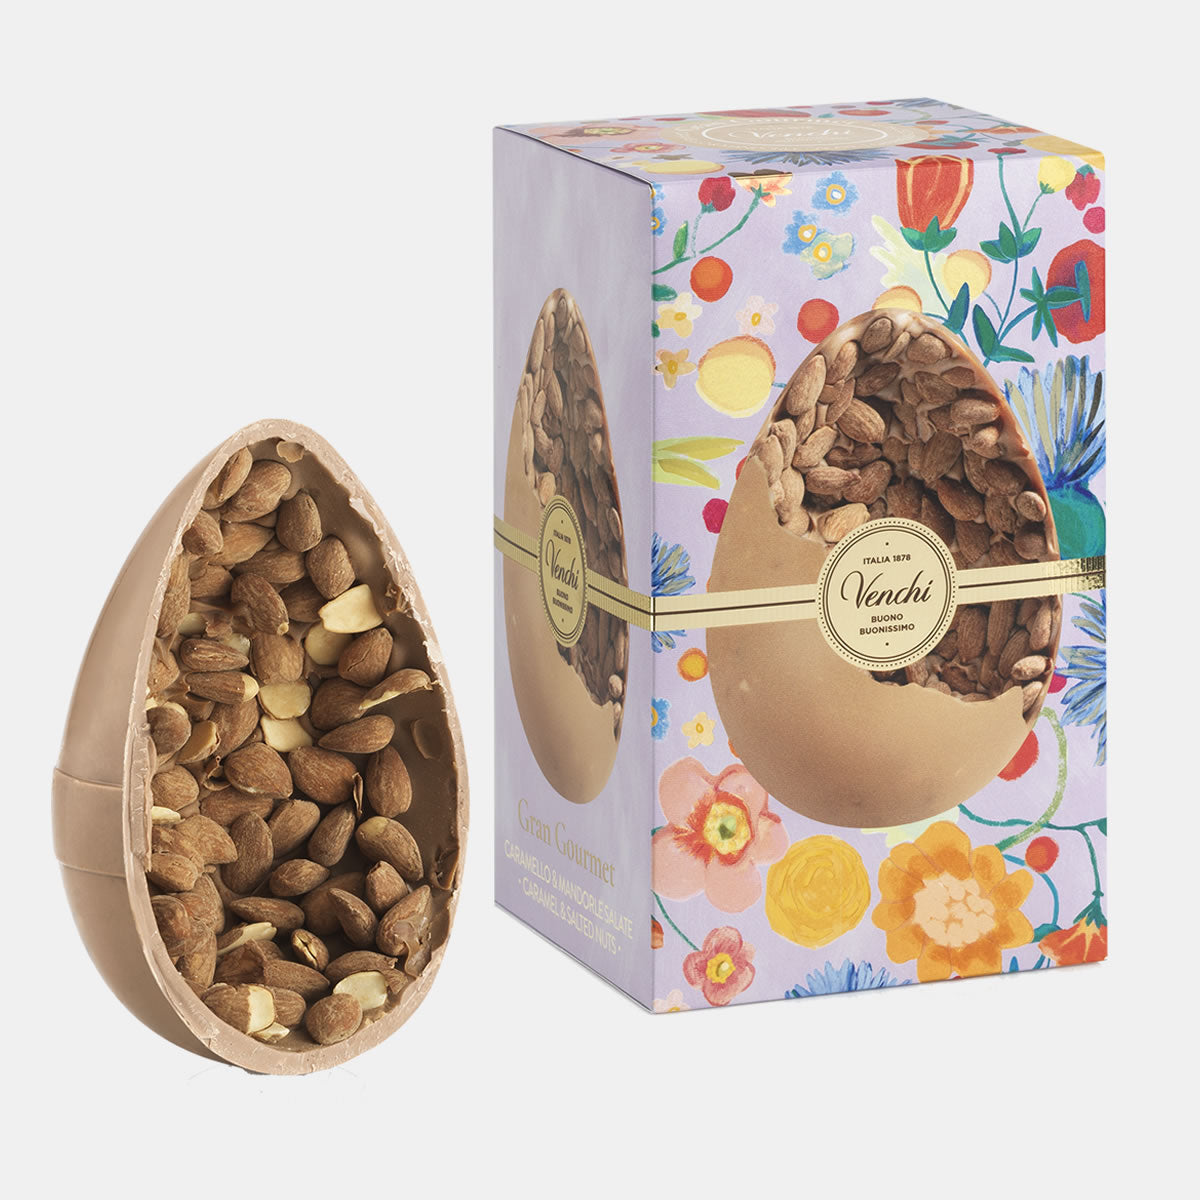 Gran Gourmet egg with caramel and salted almonds Venchi 540g